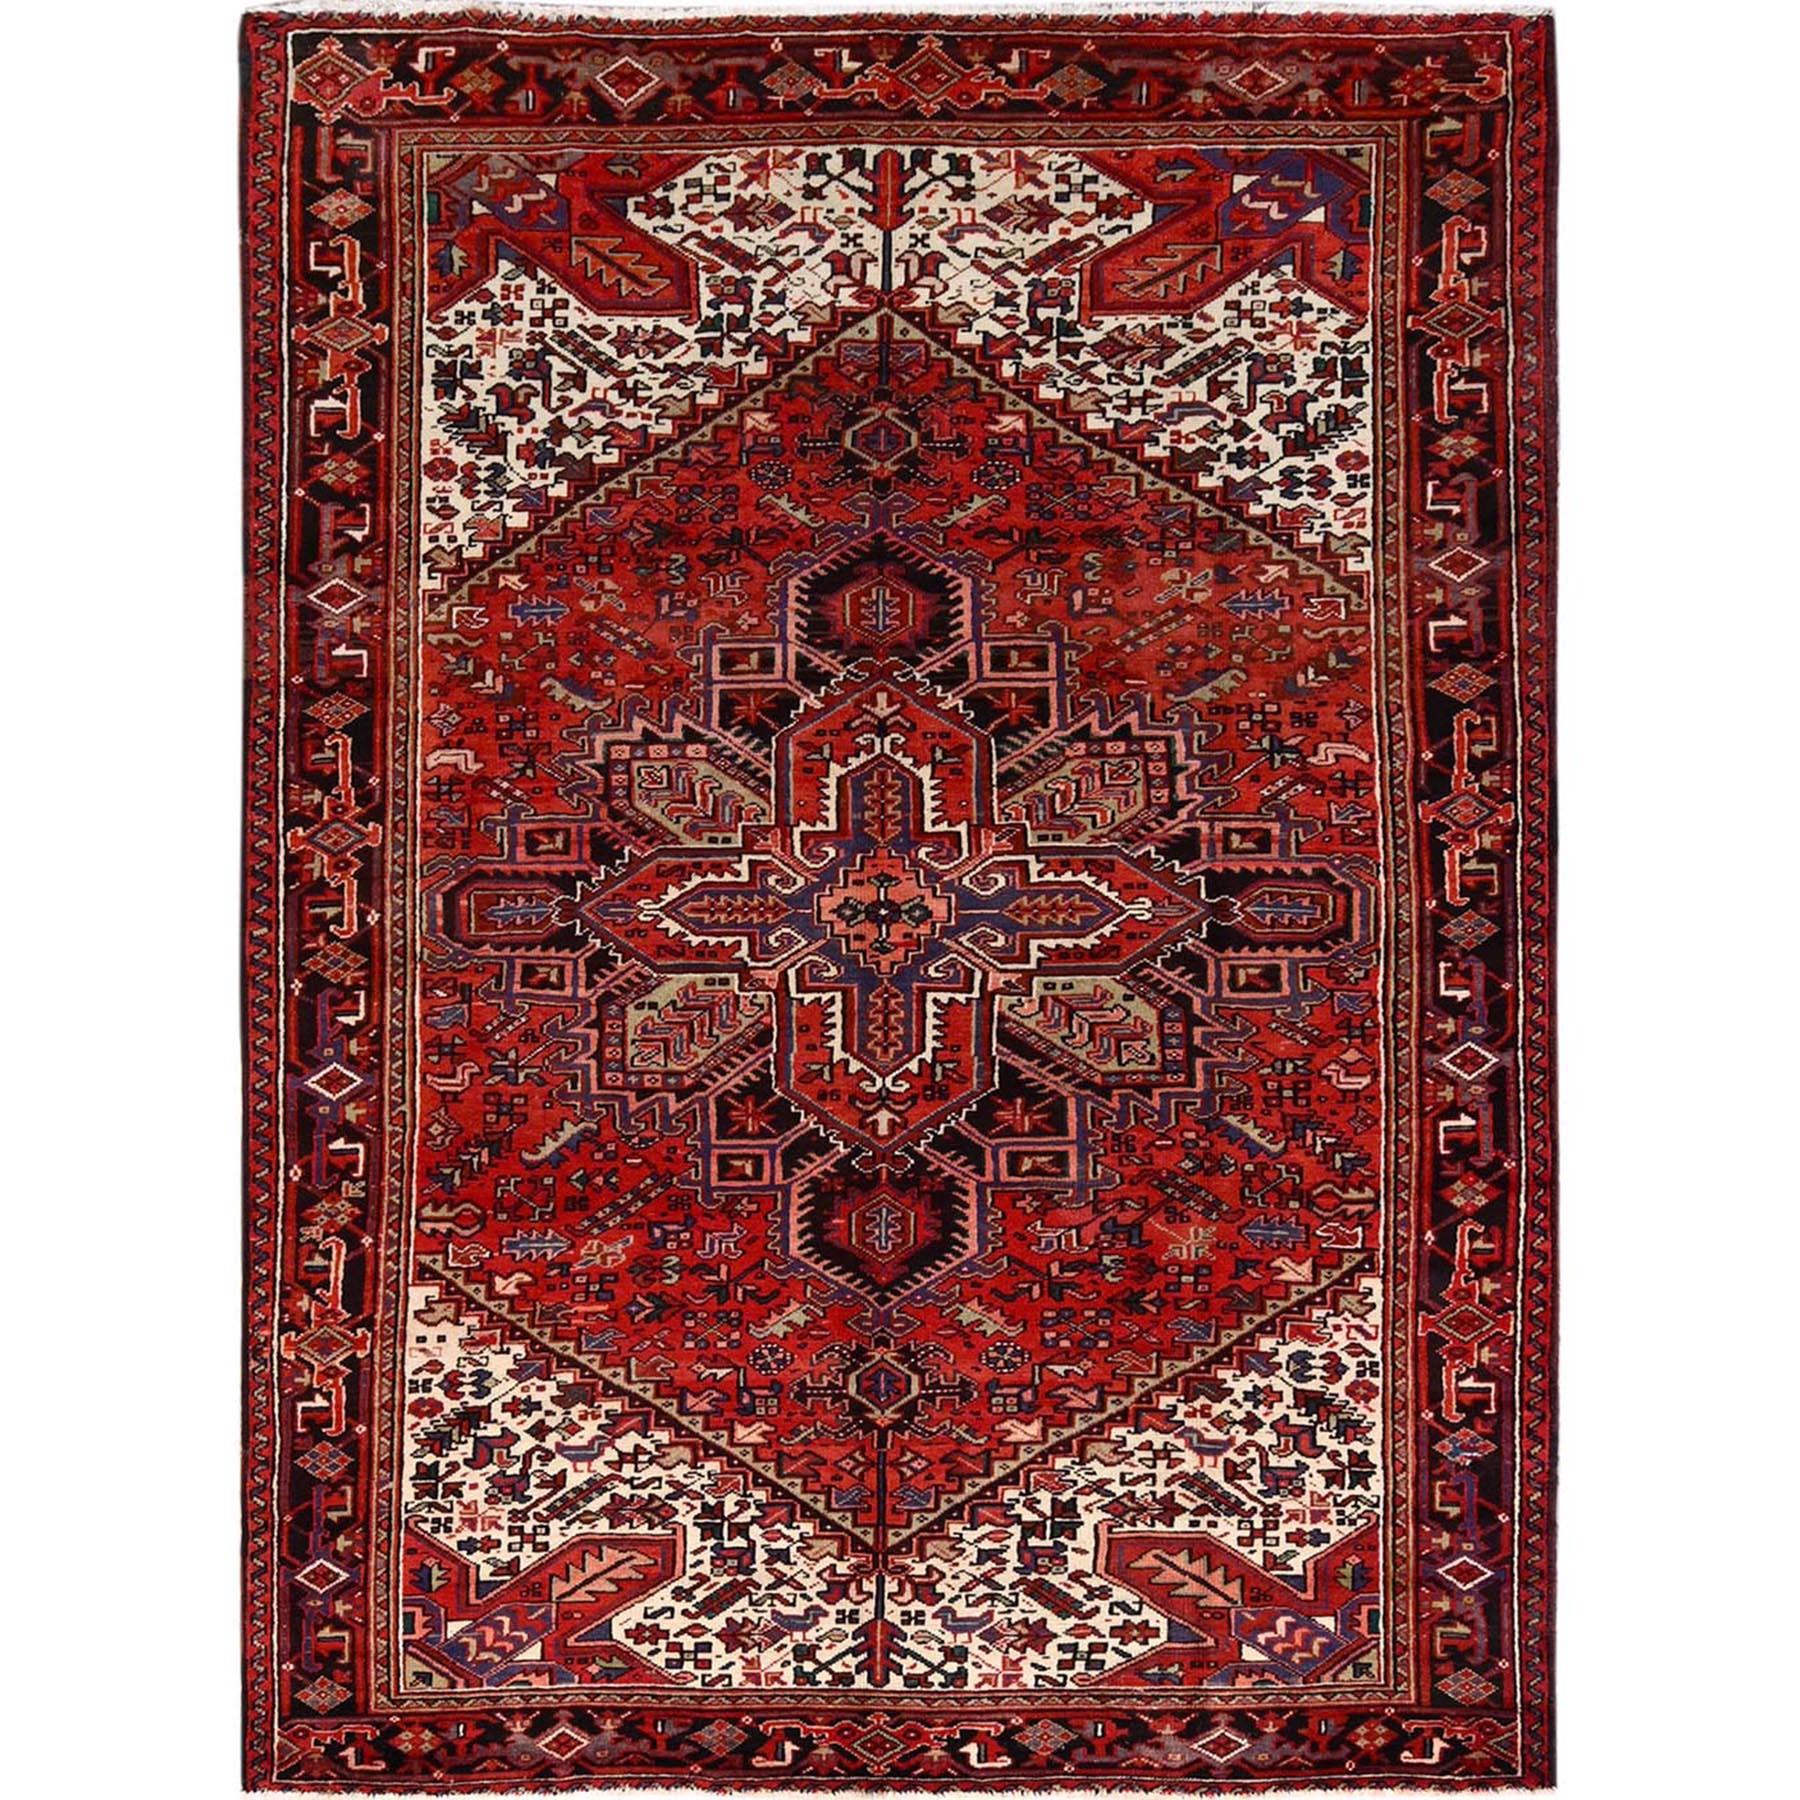  Wool Hand-Knotted Area Rug 6'7